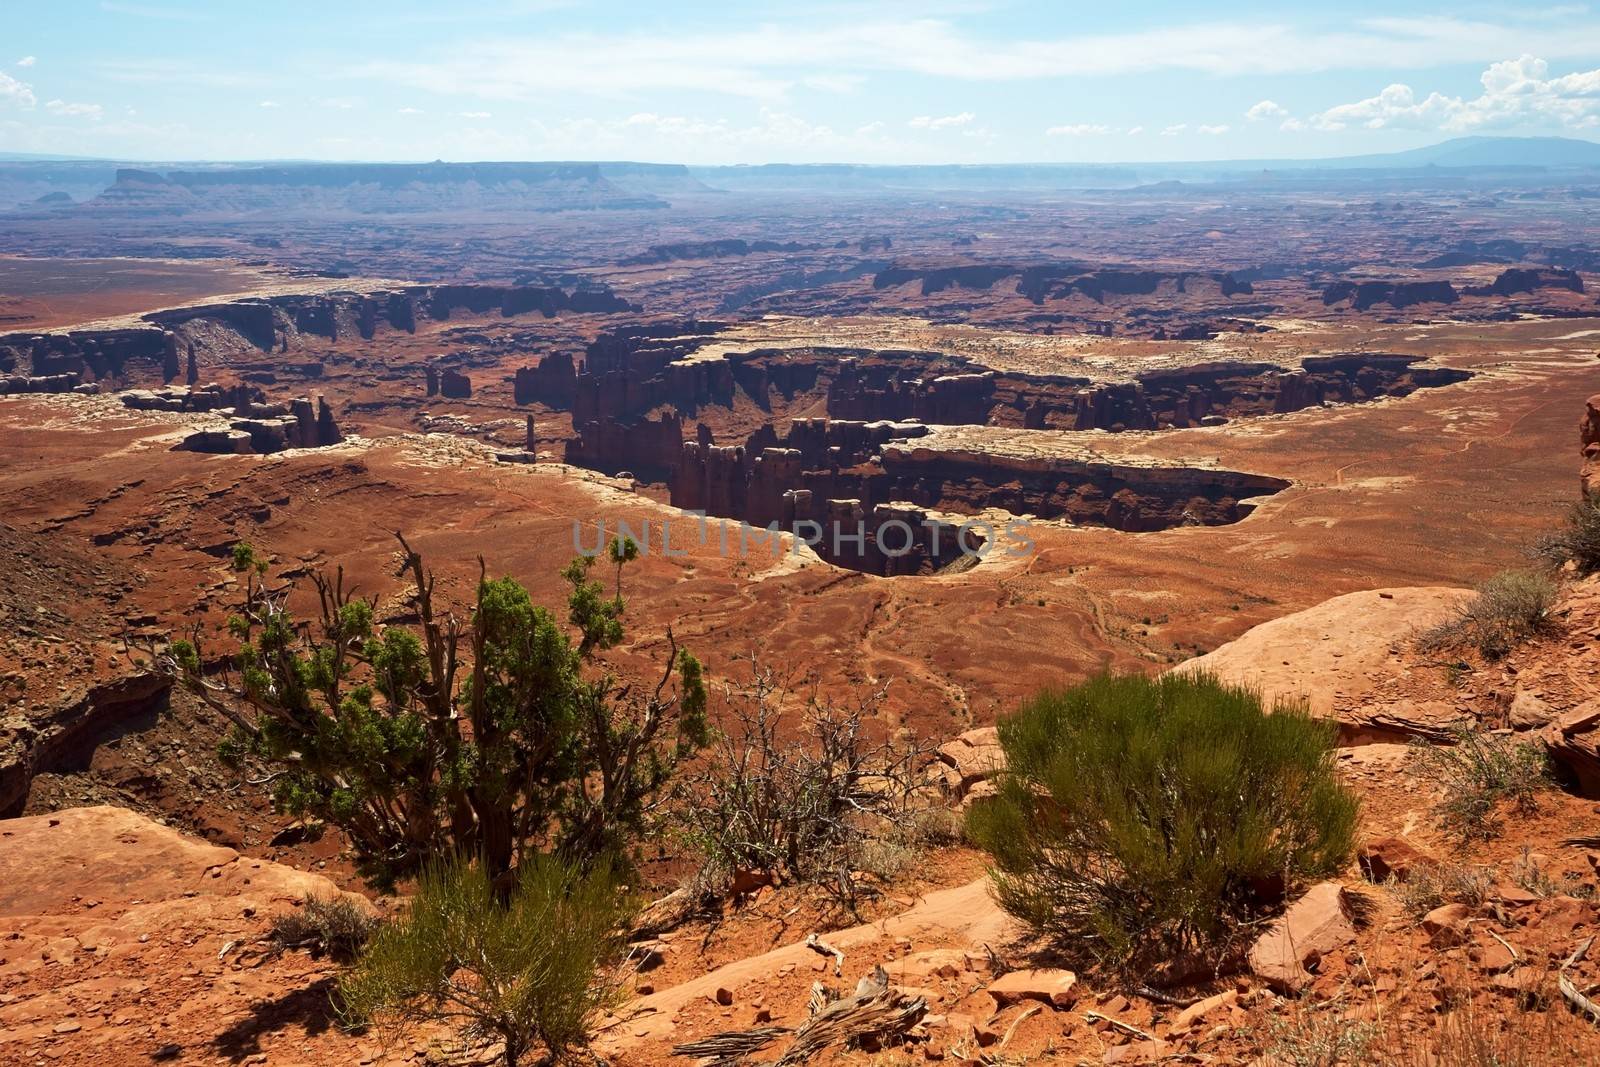 Canyonlands by LoonChild